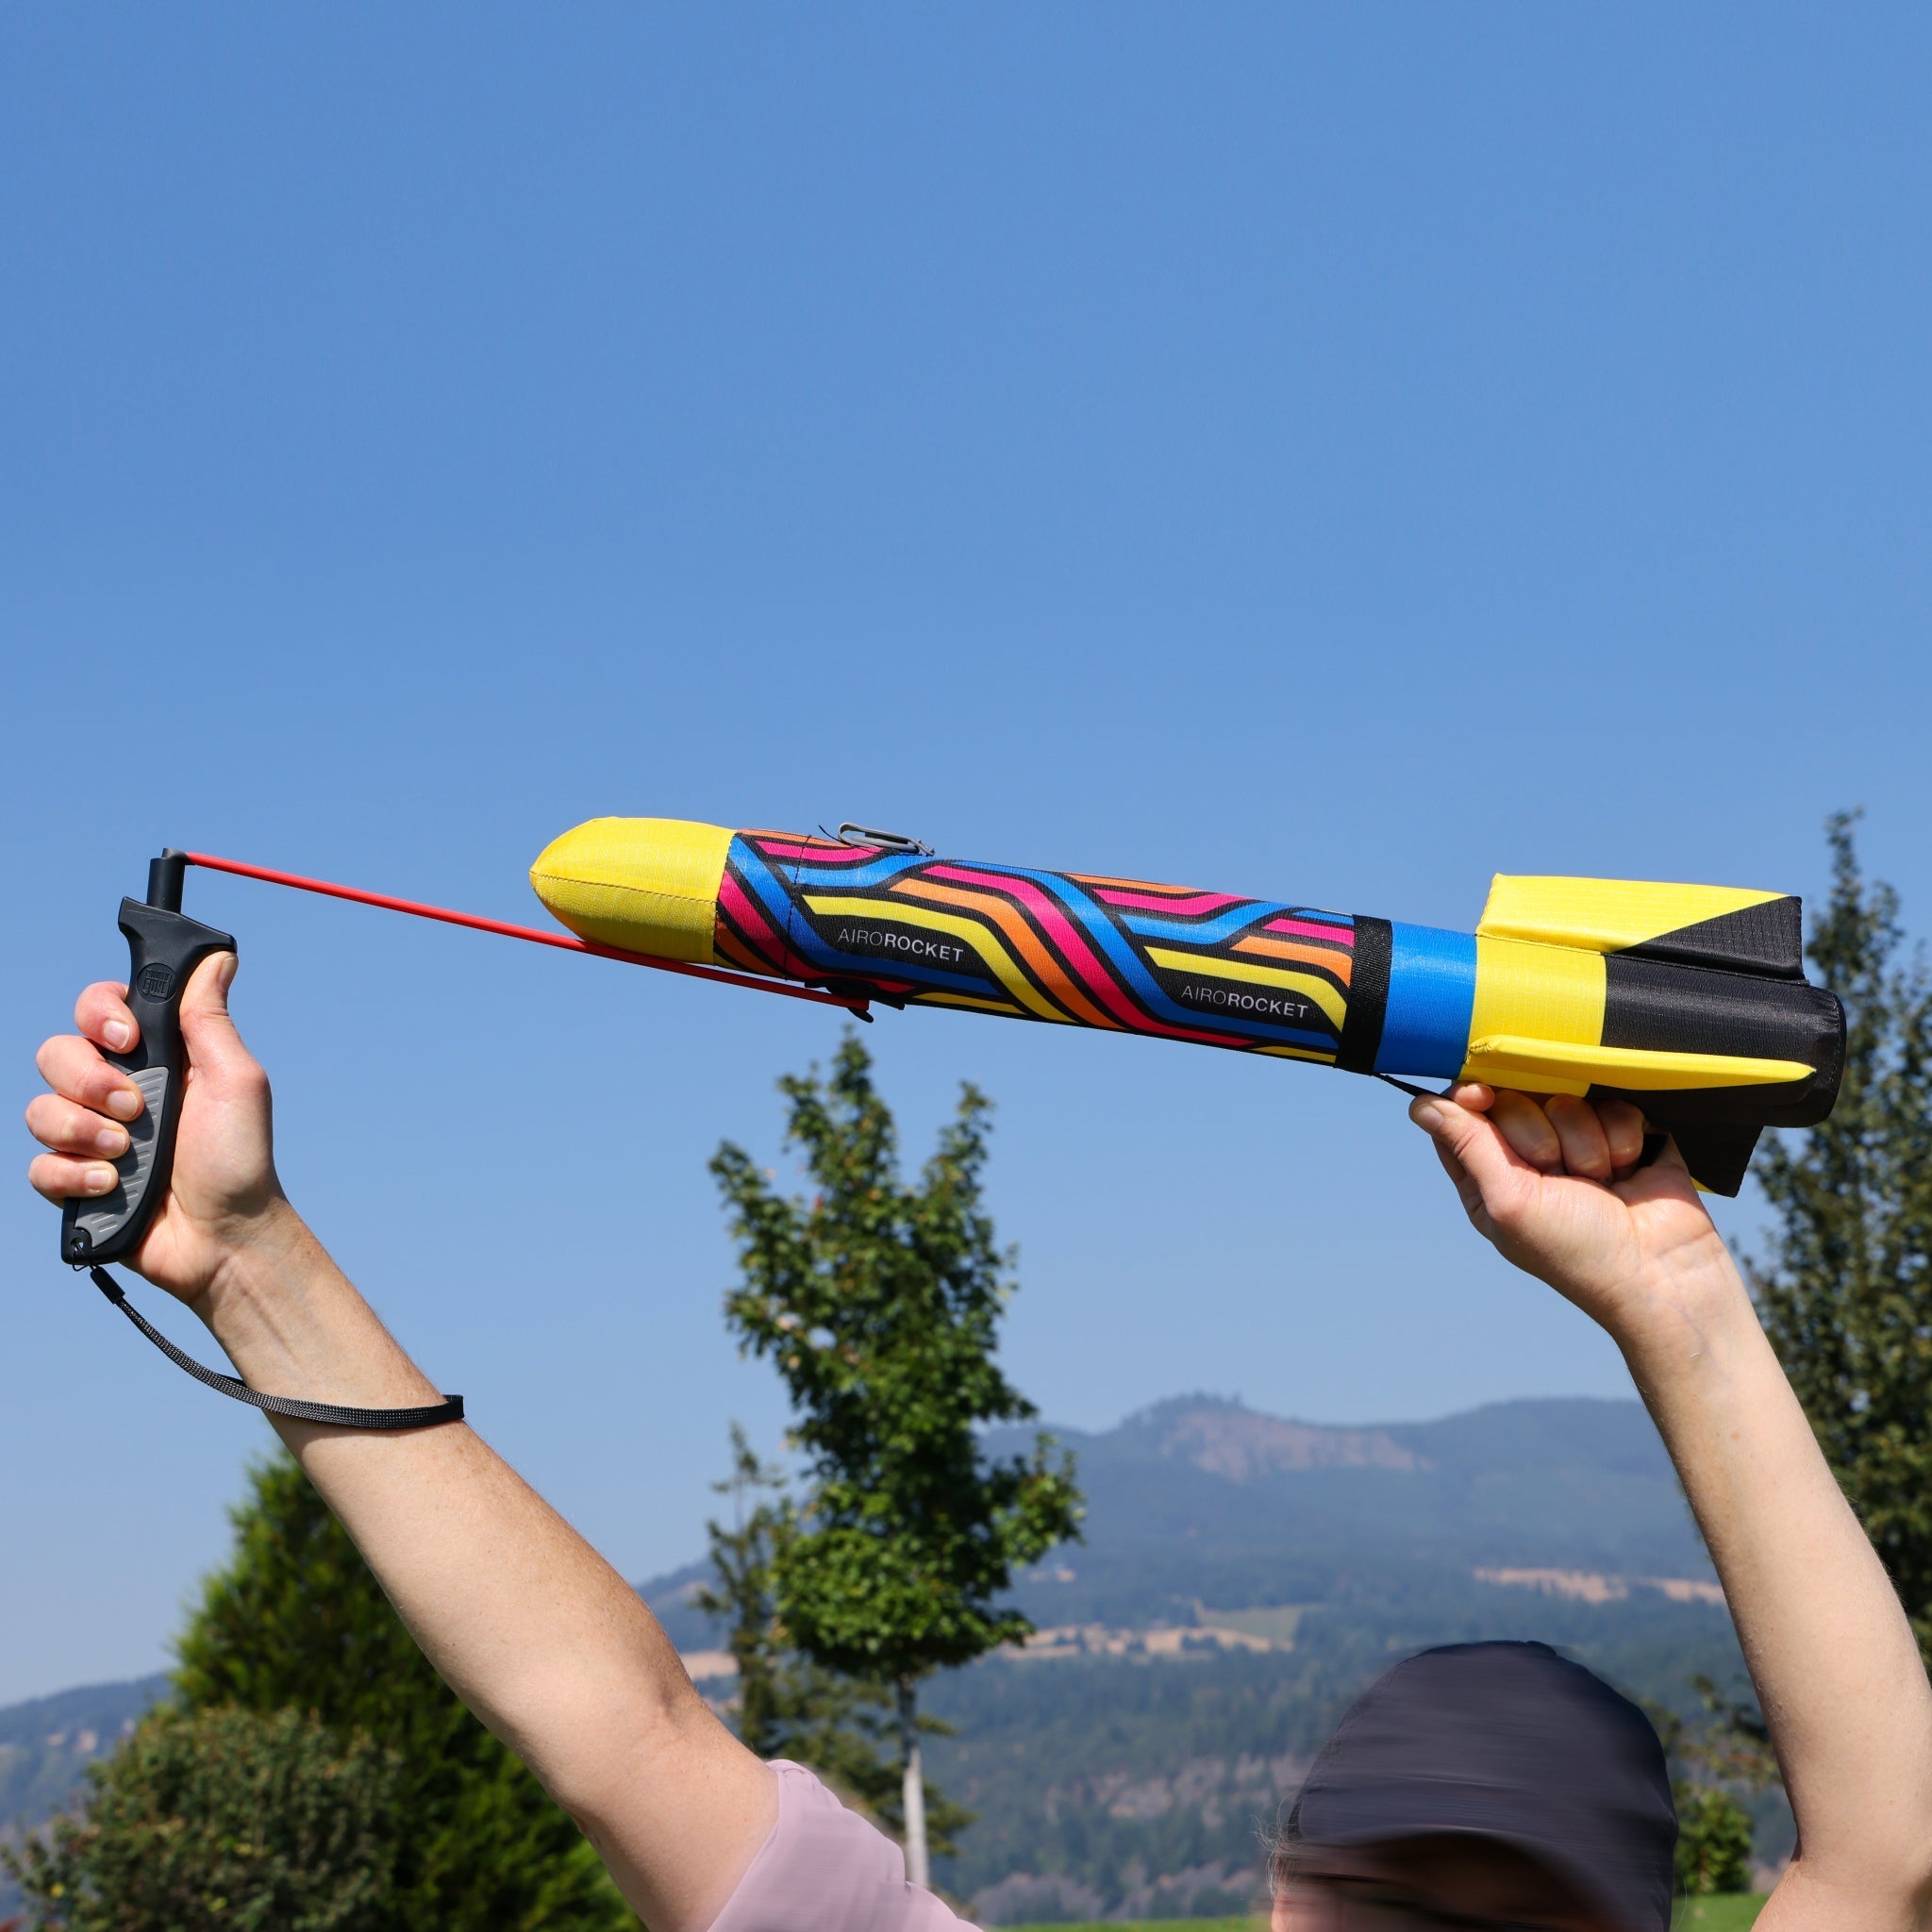 Yellow Airo Rocket toy rocket being launched outside. By Mighty Fun!